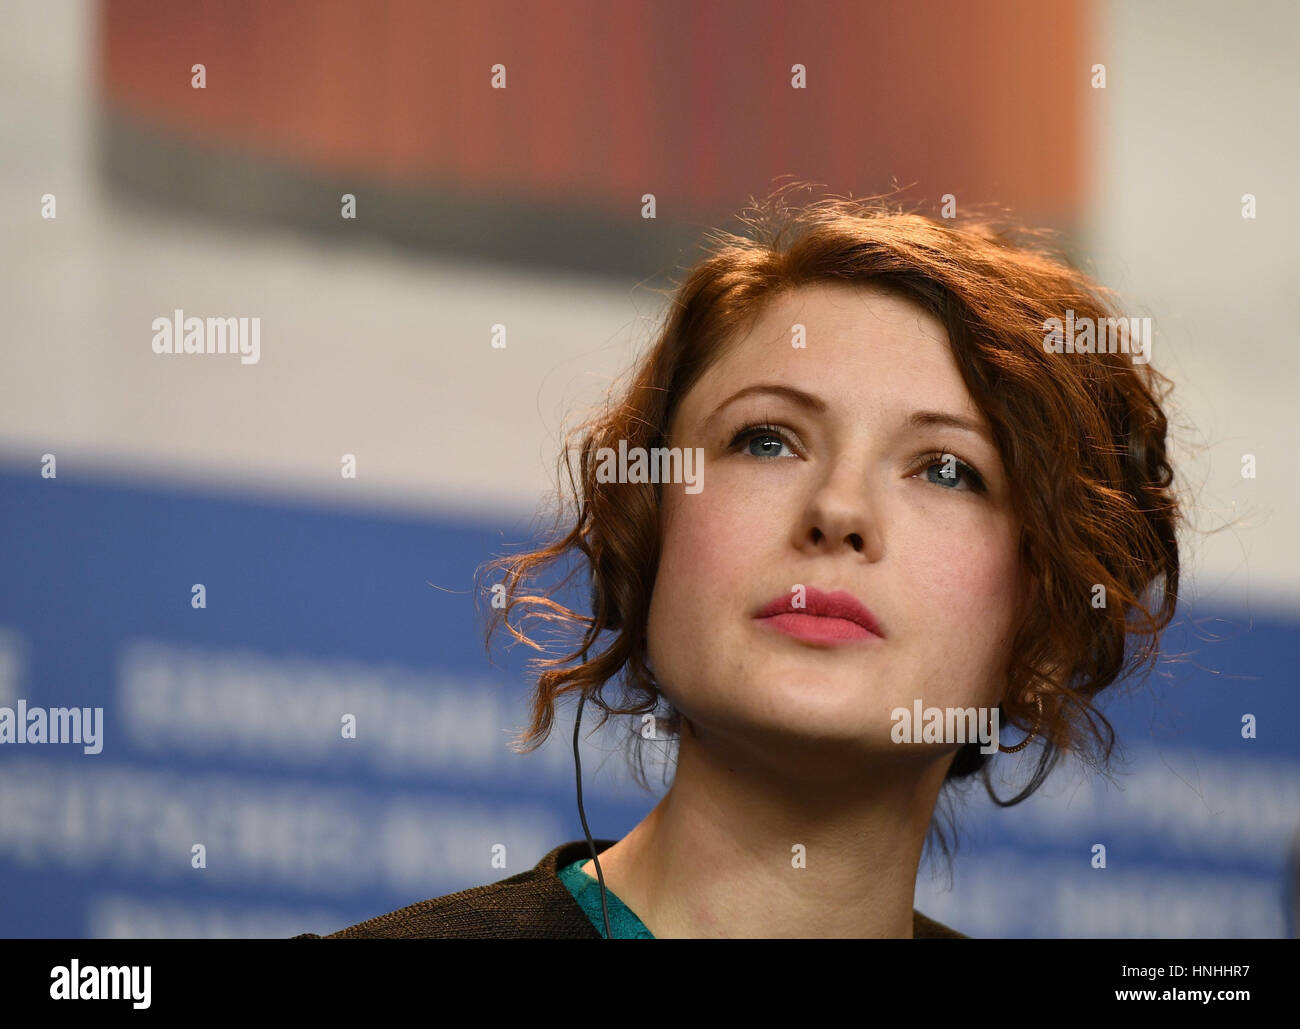 Berlin, Germany. 12th Feb, 2017. The actress Hannah Steele speaks at the photo call of the film 'The Young Karl Marx' at the 67th International film festival in Berlin, Germany, 12 February 2017. The film will be aired in the section 'Berlinale Special'. Photo: Monika Skolimowska/dpa/Alamy Live News Stock Photo